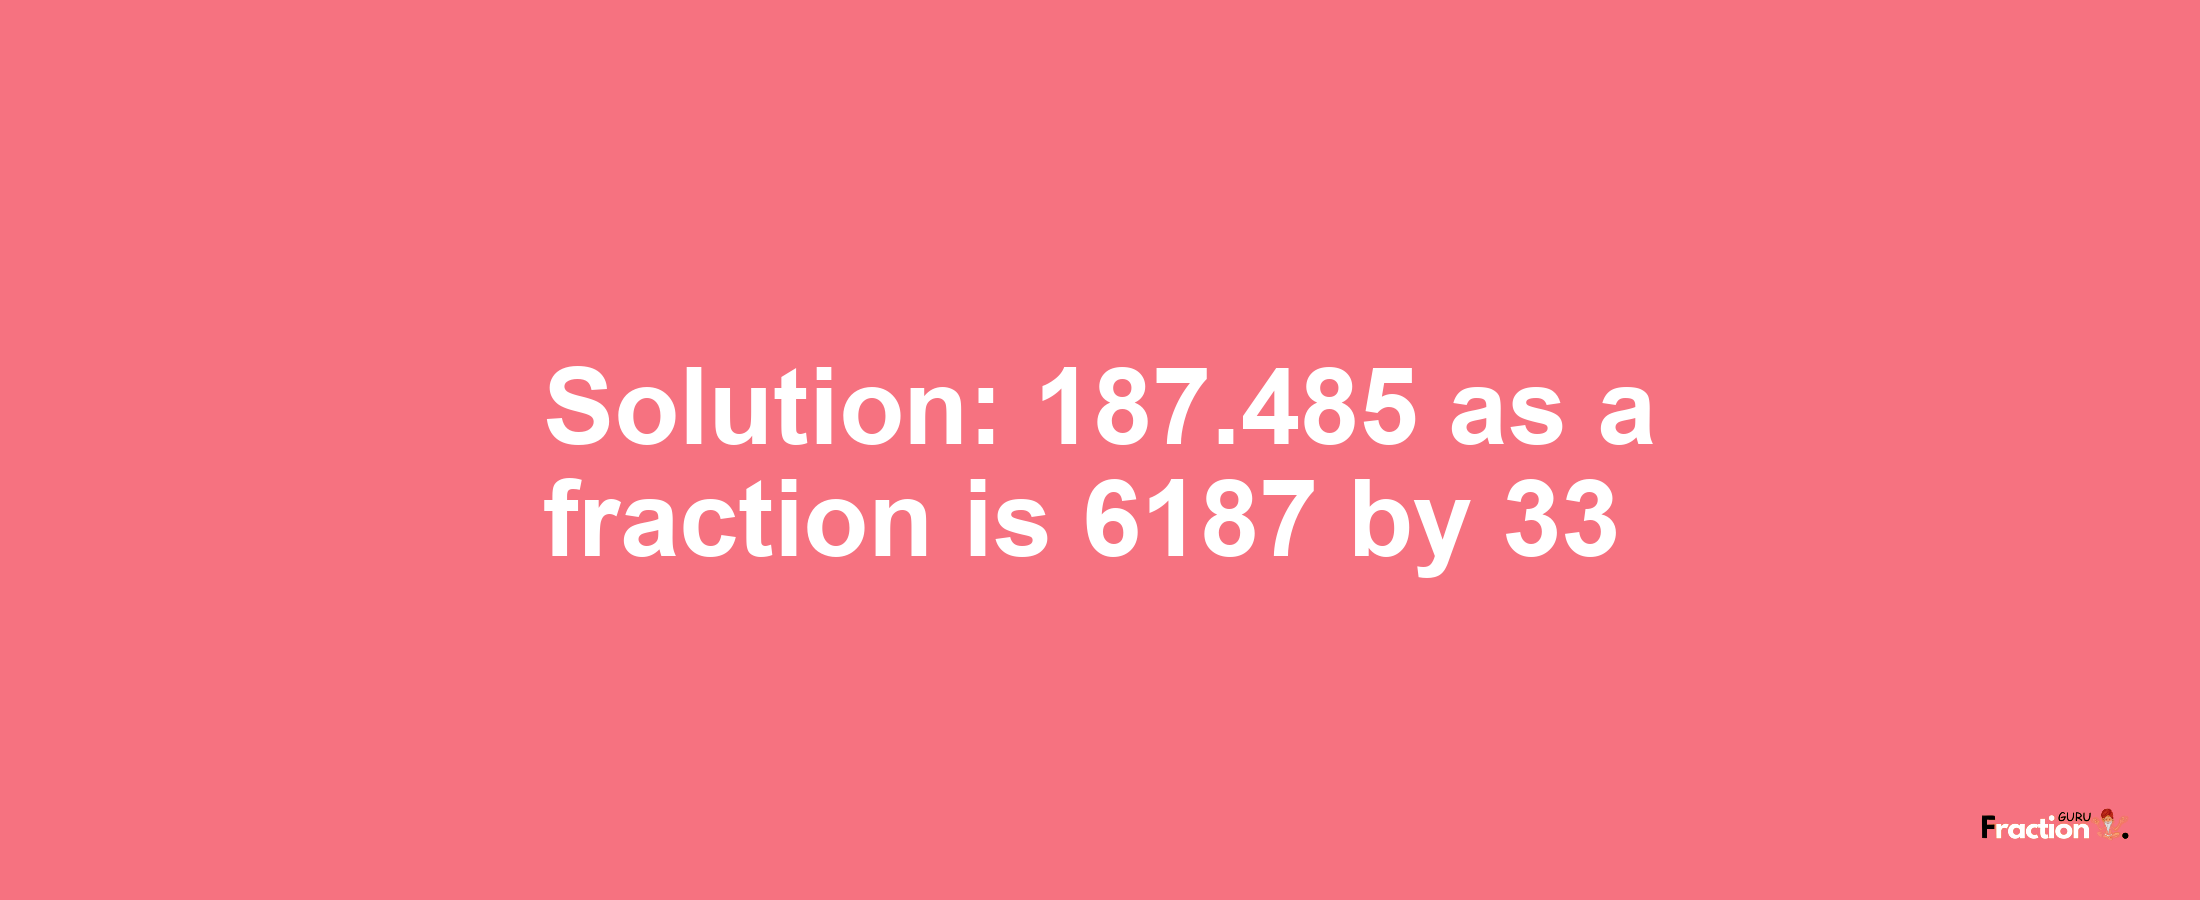 Solution:187.485 as a fraction is 6187/33